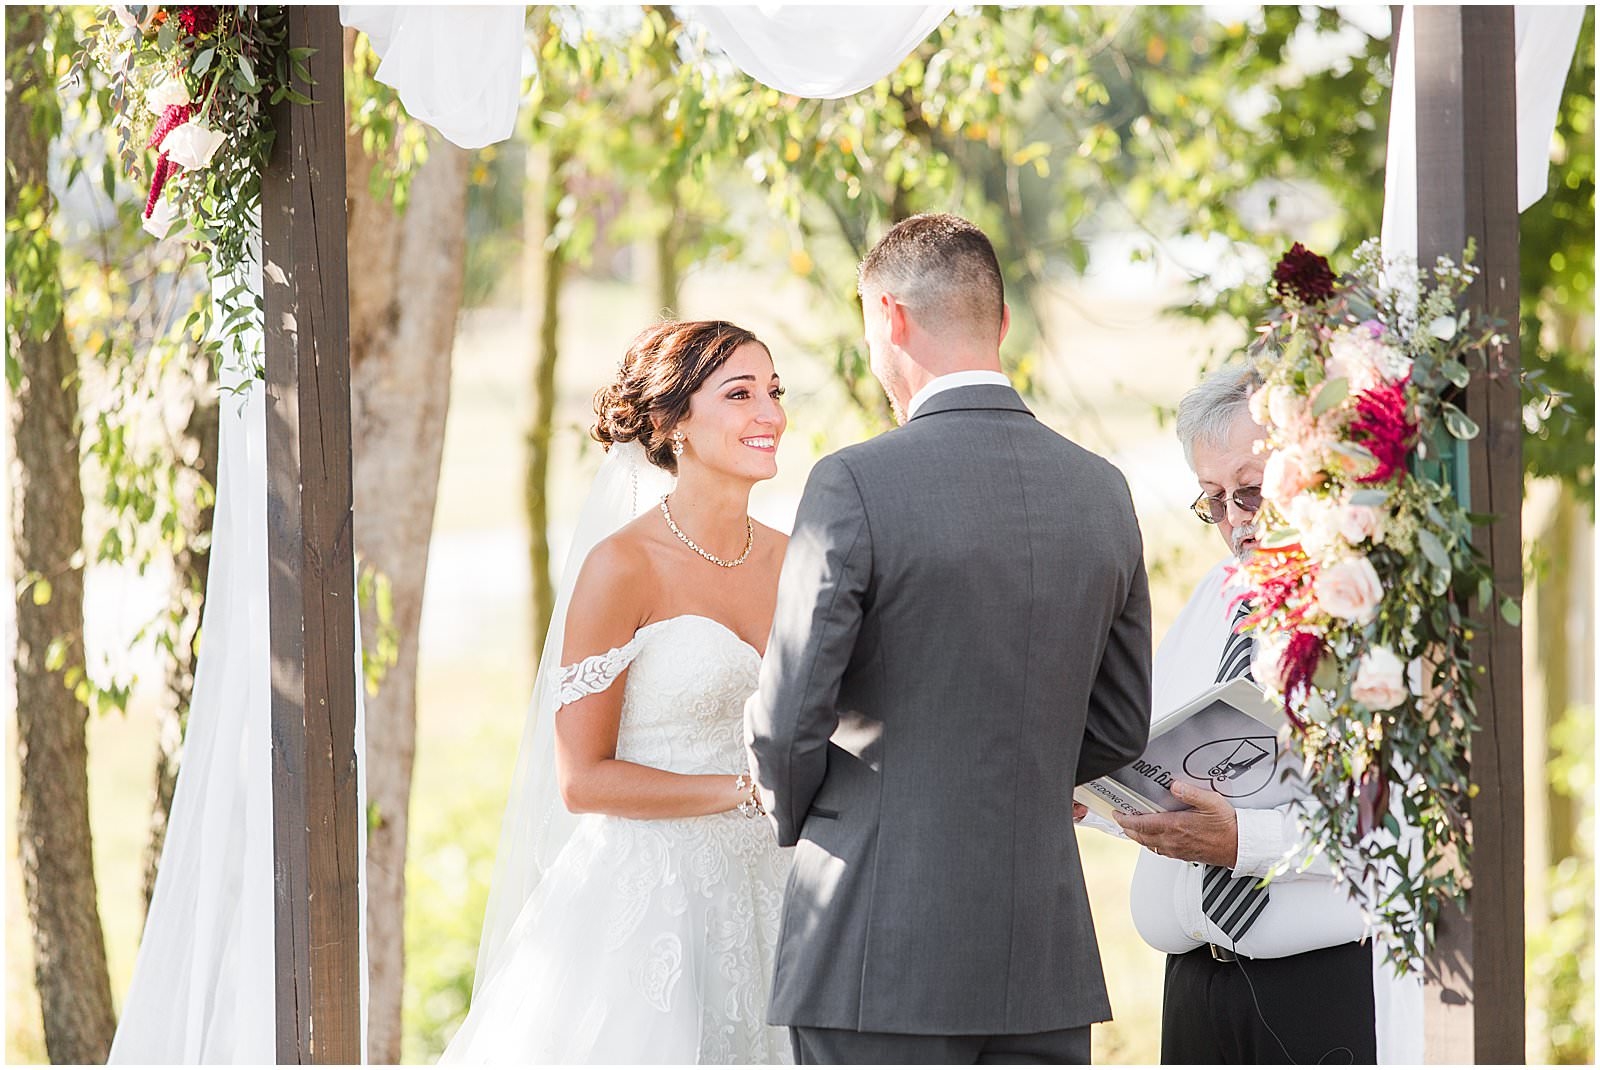 A Stunning Fall Wedding in Indianapolis, IN |. Sally and Andrew | Bret and Brandie Photography 0105.jpg